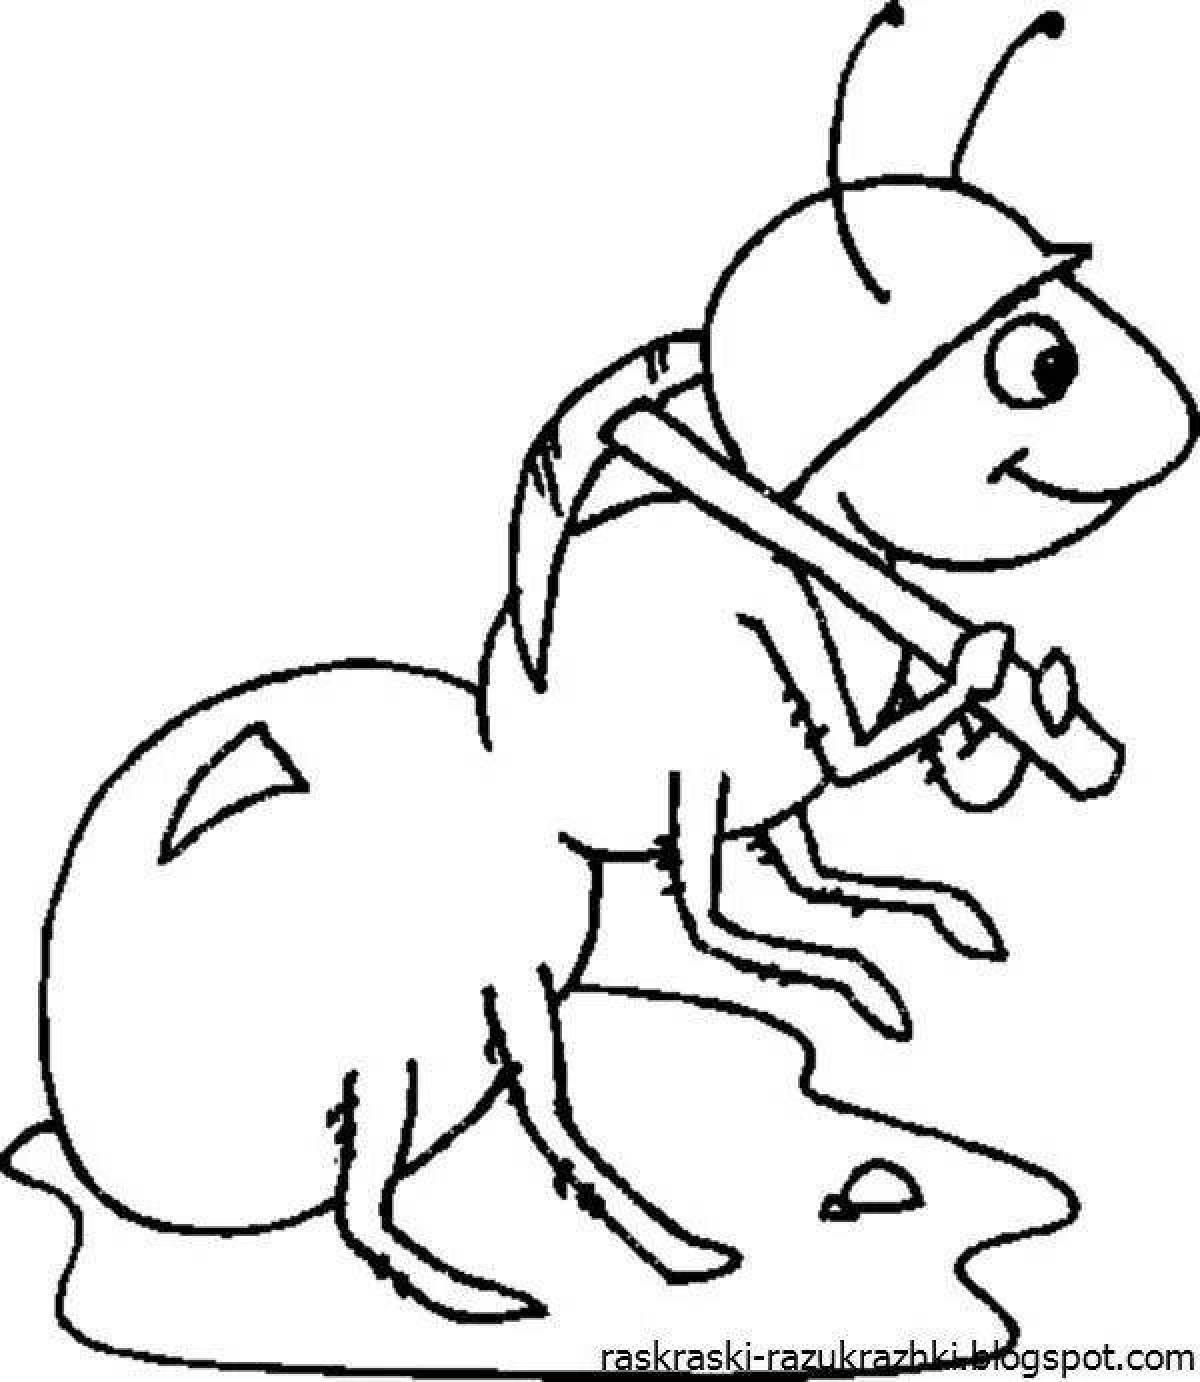 Ant for kids #10